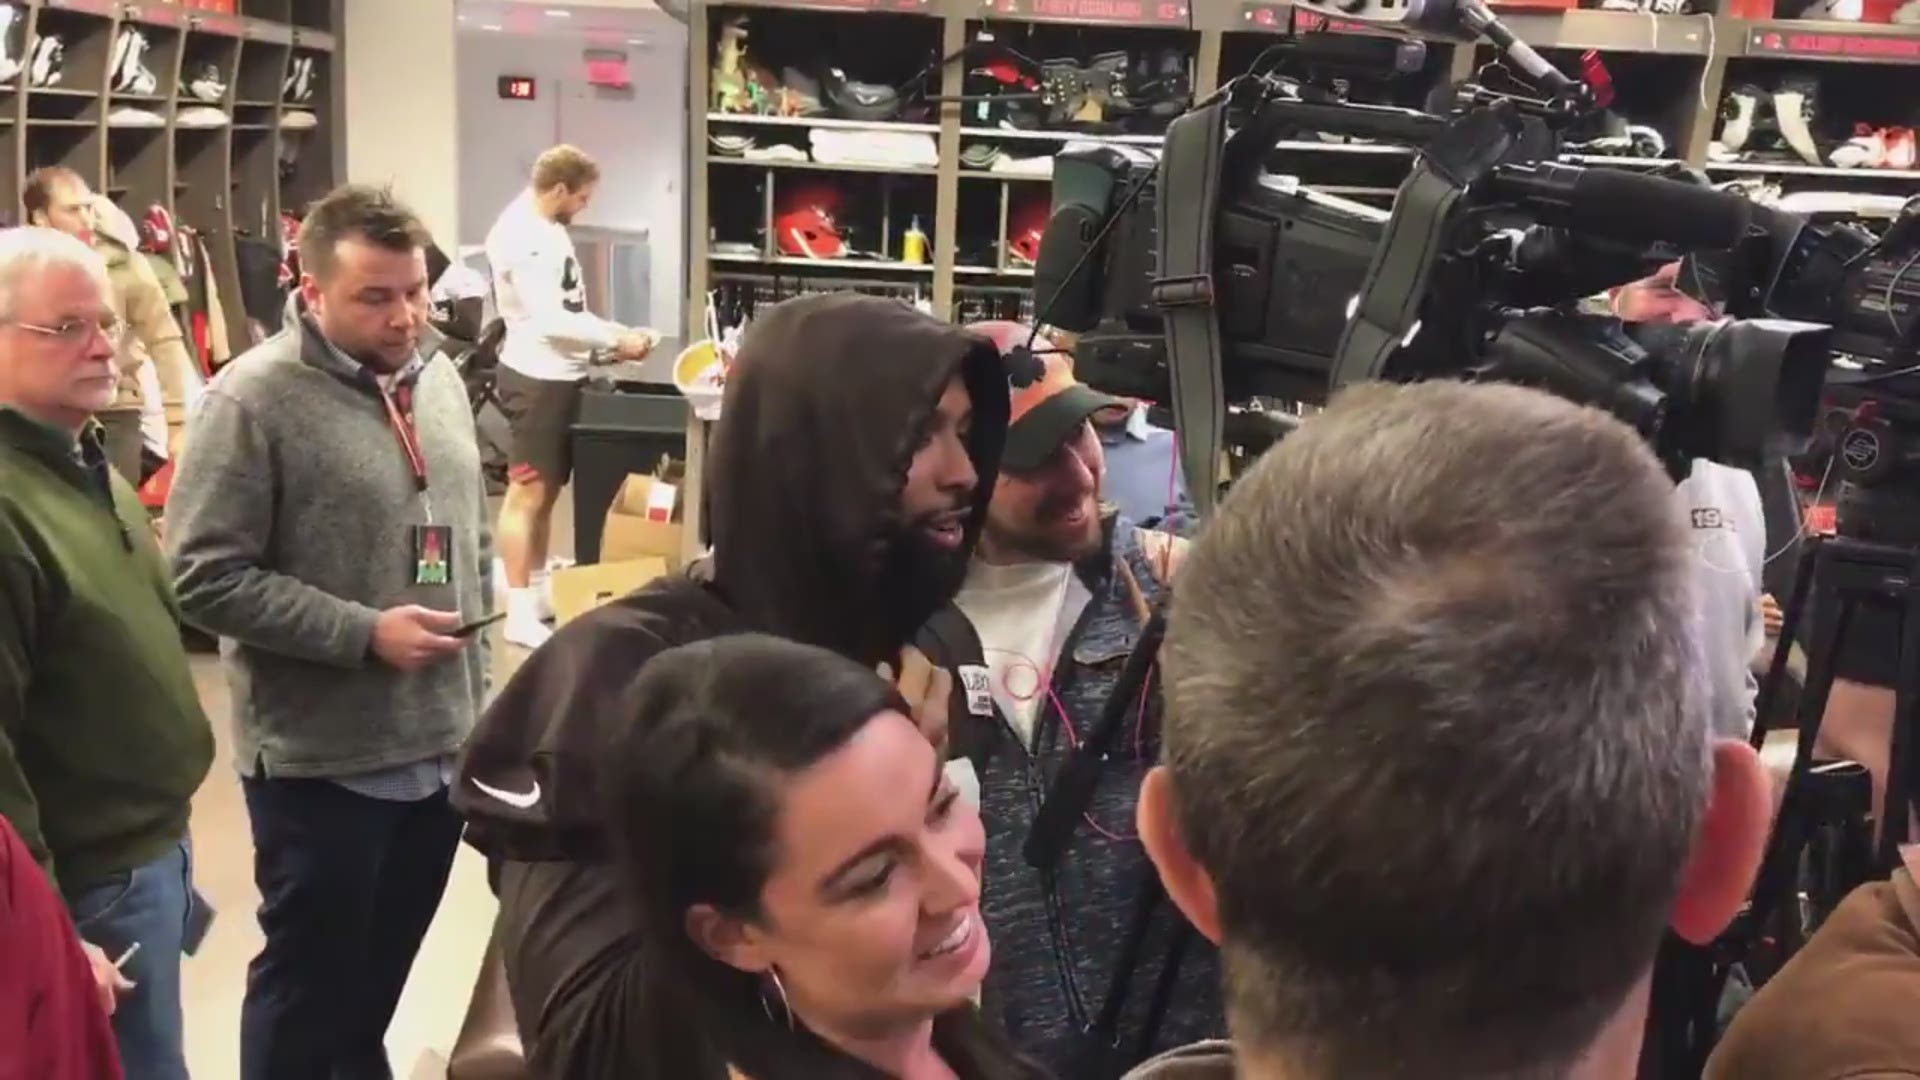 Cleveland Browns wide receiver Odell Beckham Jr. had a little fun with quarterback Baker Mayfield during a press conference at team headquarters Wednesday.